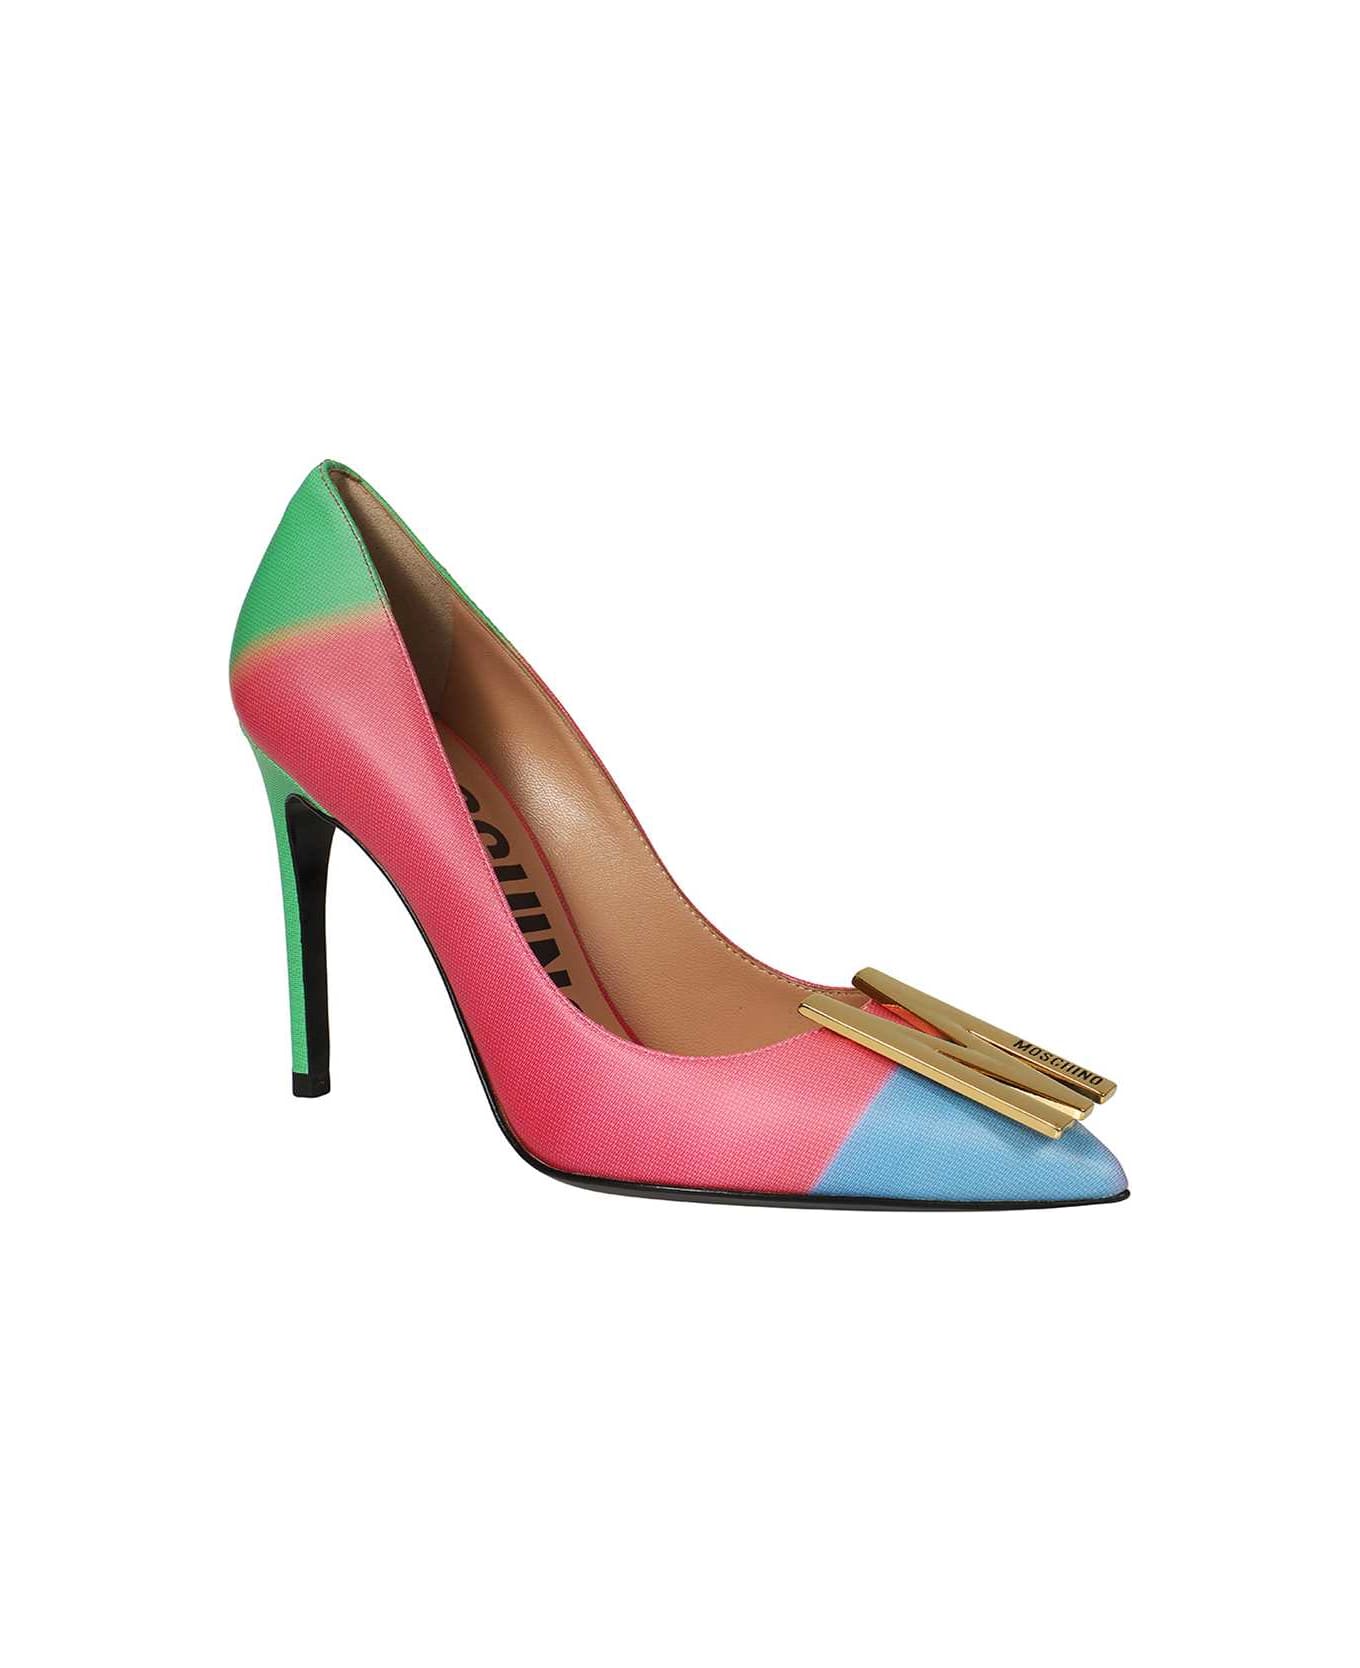 Moschino Leather Pumps - Multicolor ハイヒール